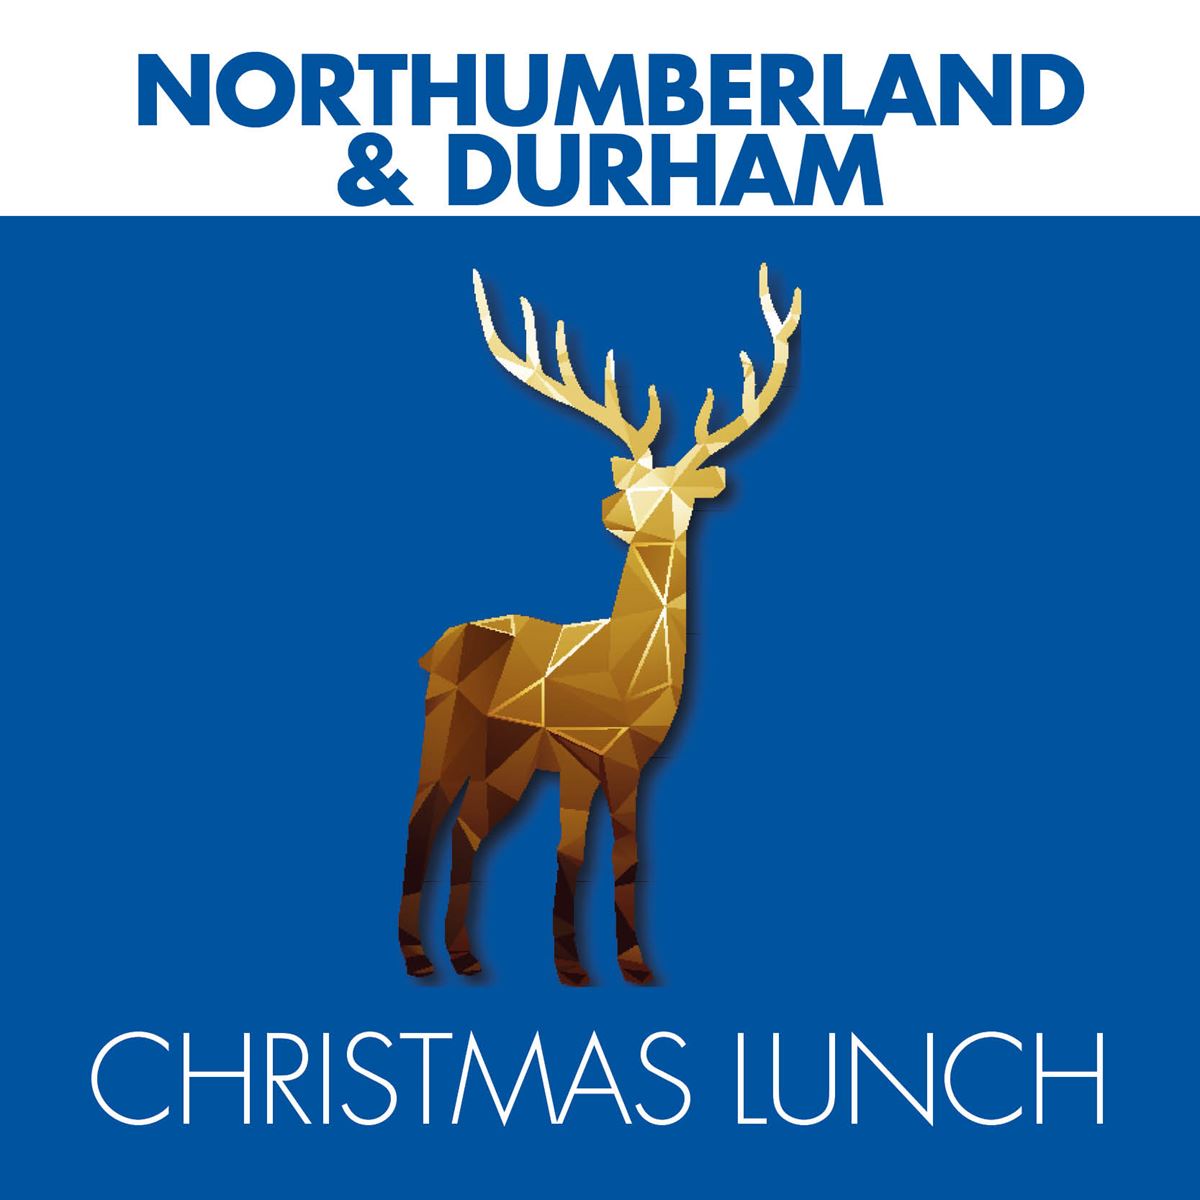 Lord's Taverners Northumberland & Durham Christmas Lunch